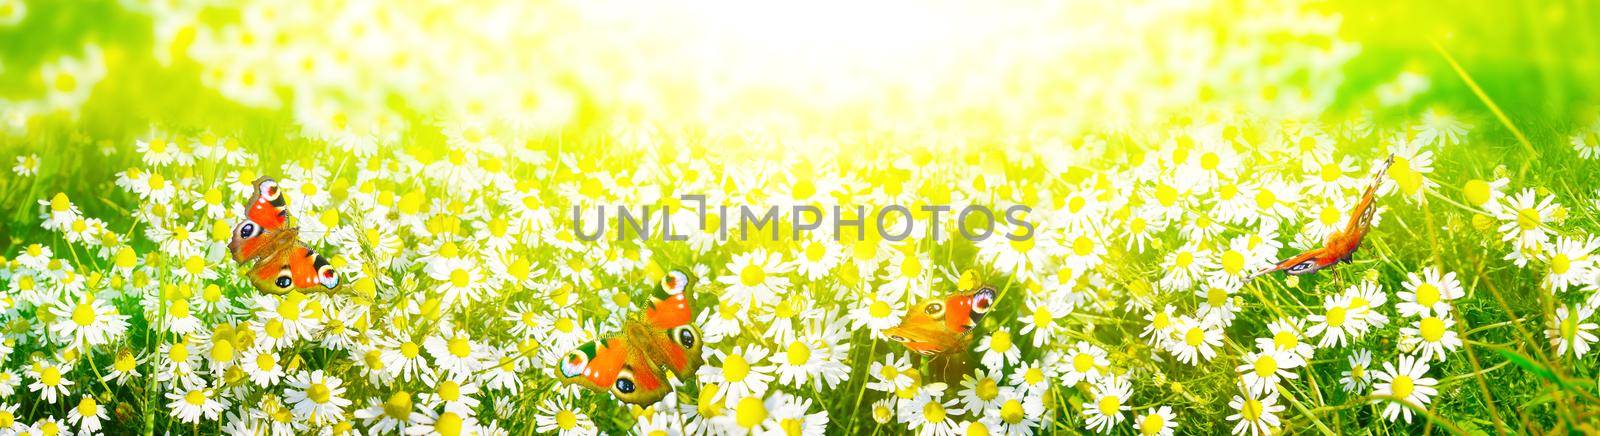 Scenery background of the natural blooming chamomile flower and butterflies. by Taut